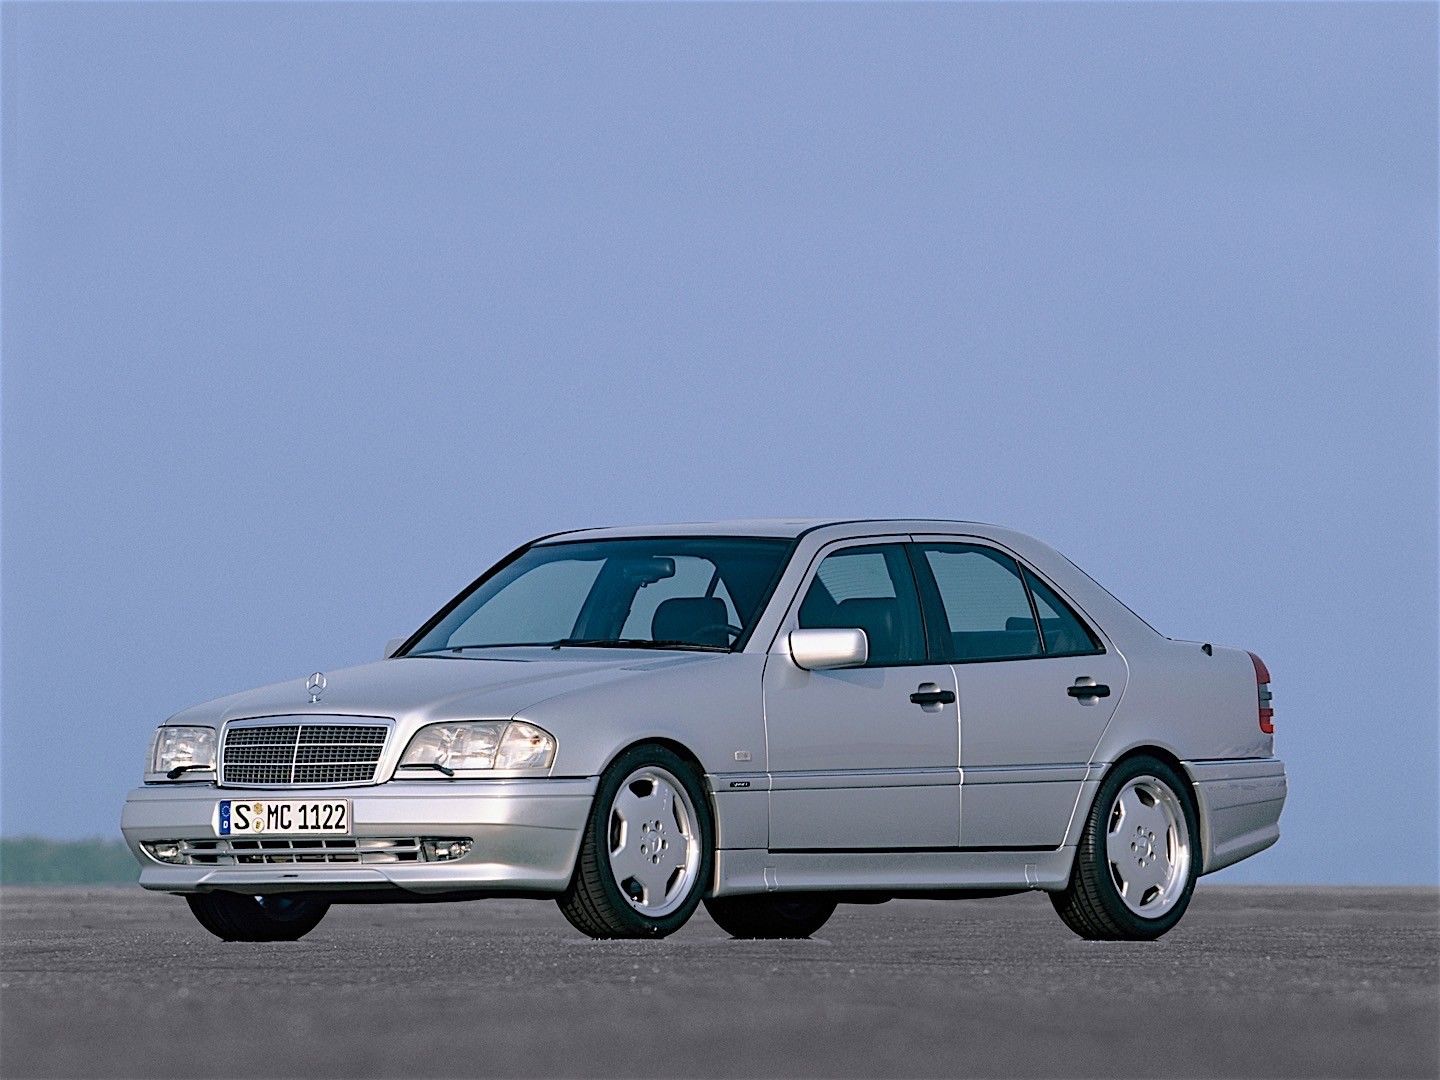 C 36 AMG Was the First High Performance Car Jointly Developed By AMG And Mercedes-Benz